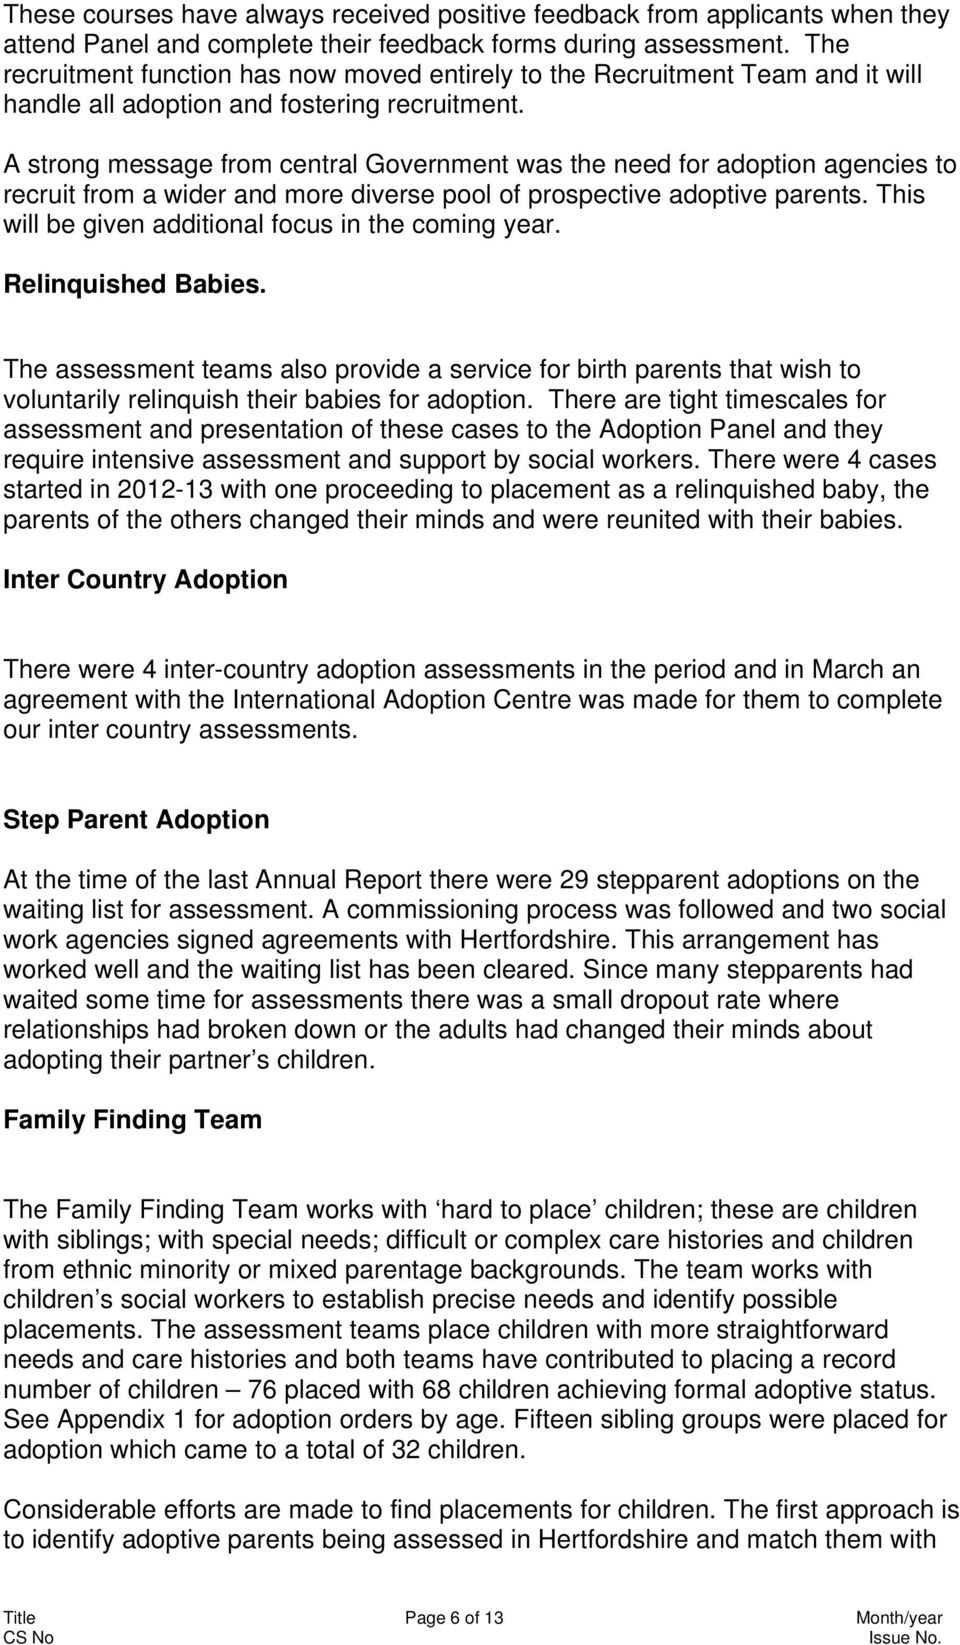 A strong message from central Government was the need for adoption agencies to recruit from a wider and more diverse pool of prospective adoptive parents.